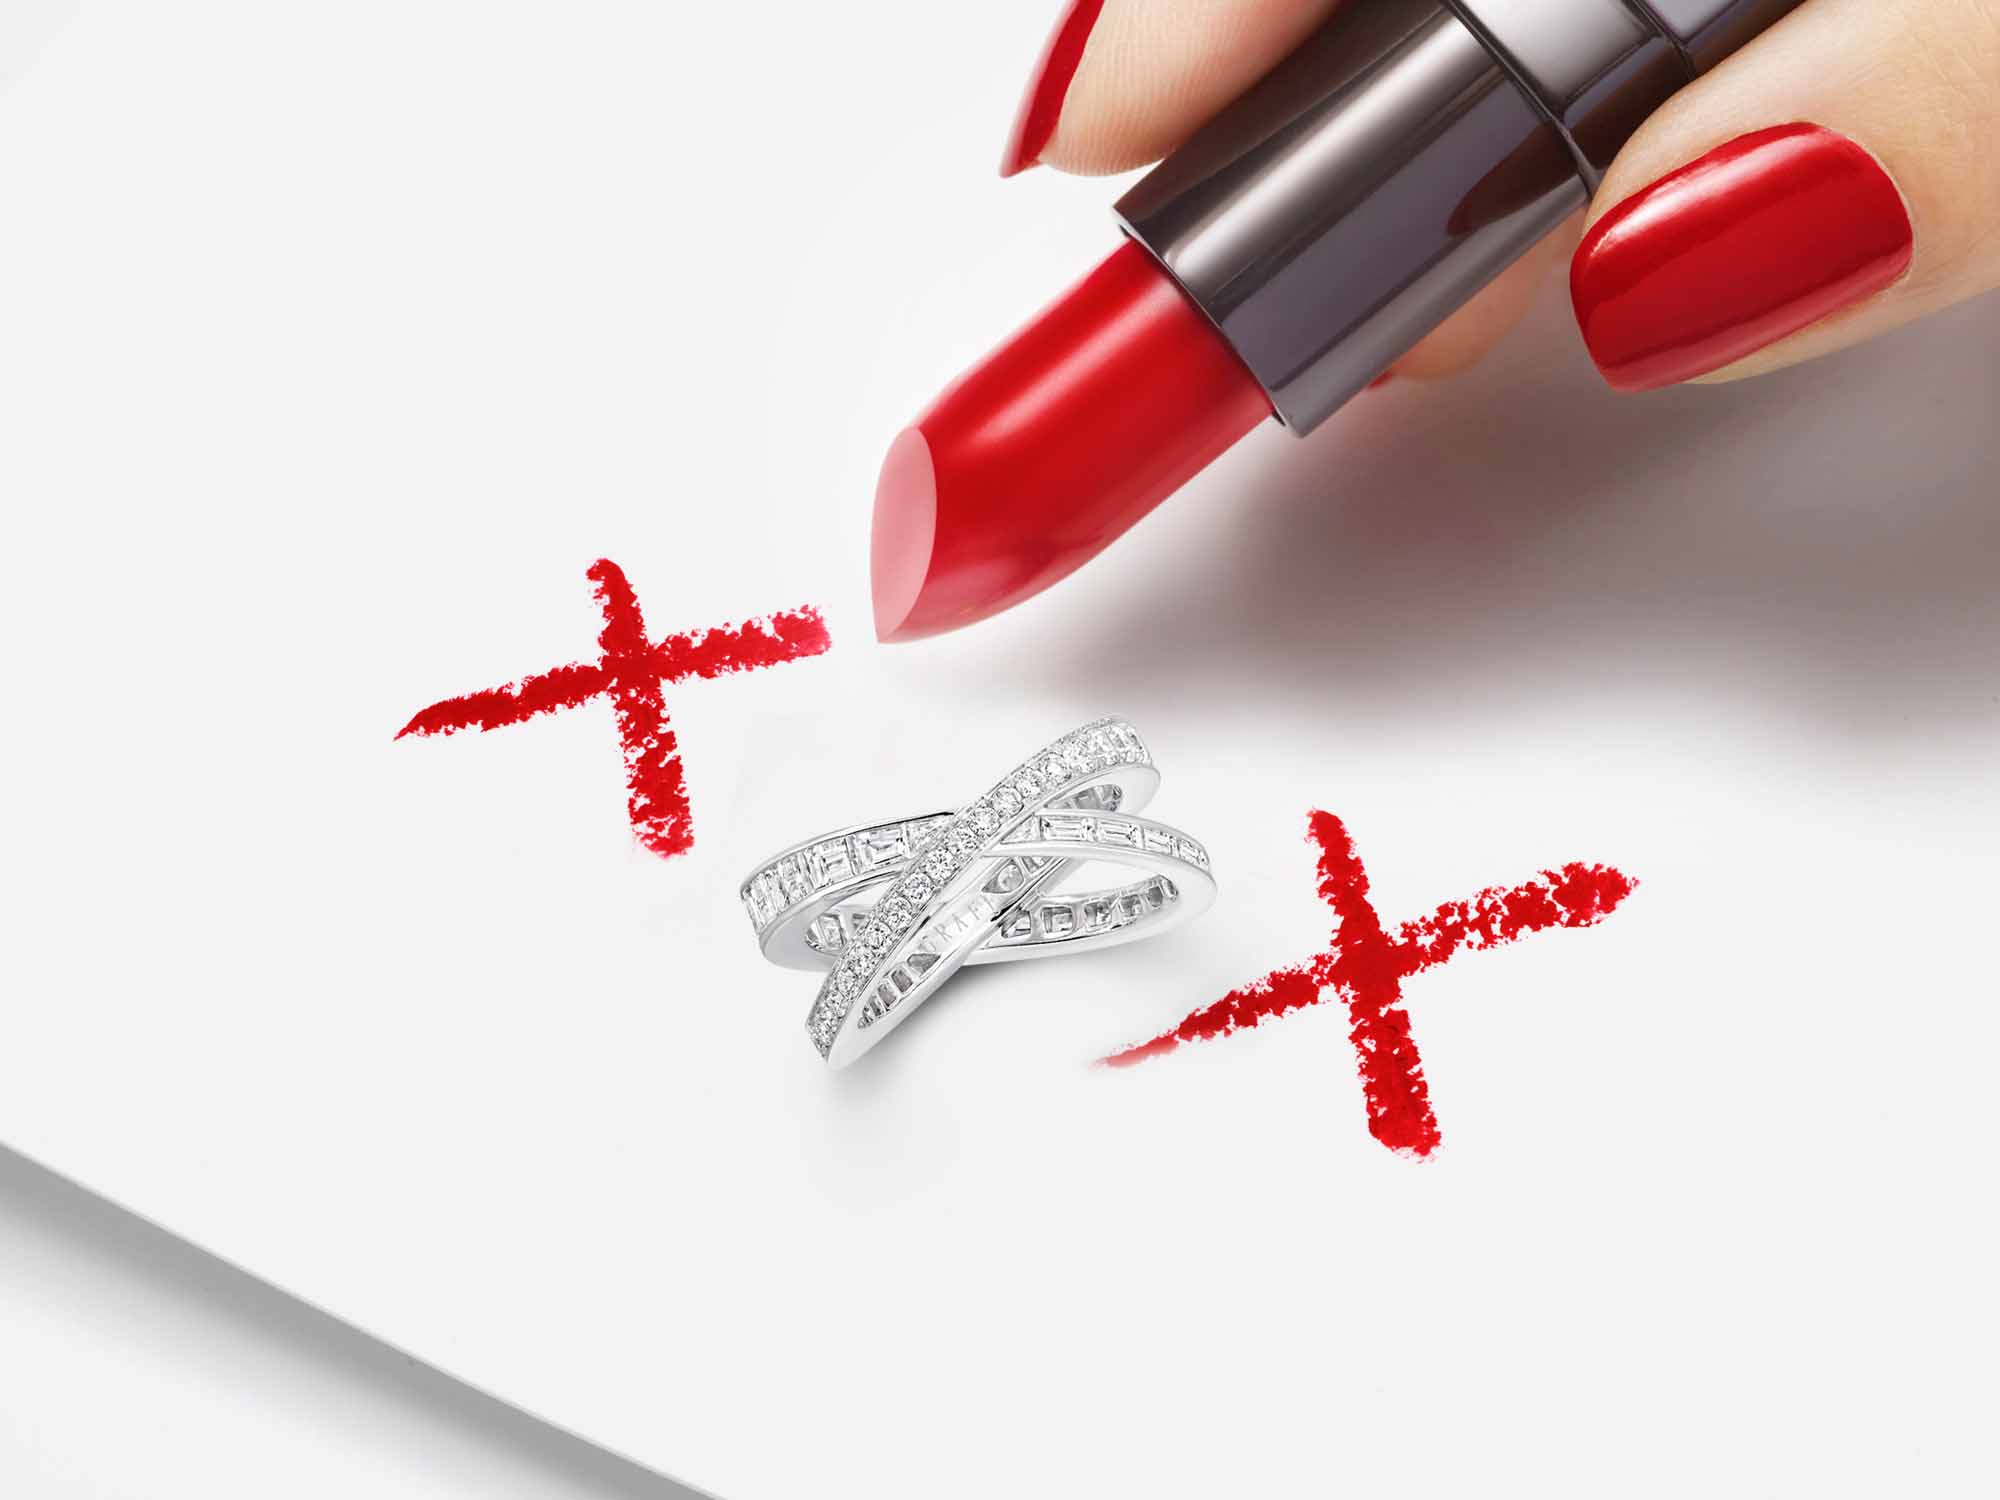 Model drawing kiss symbols with red lipstick and a Kiss Pavé Baguette and round Diamond Ring  from the Graff Spiral Jewellery Collection in the middle